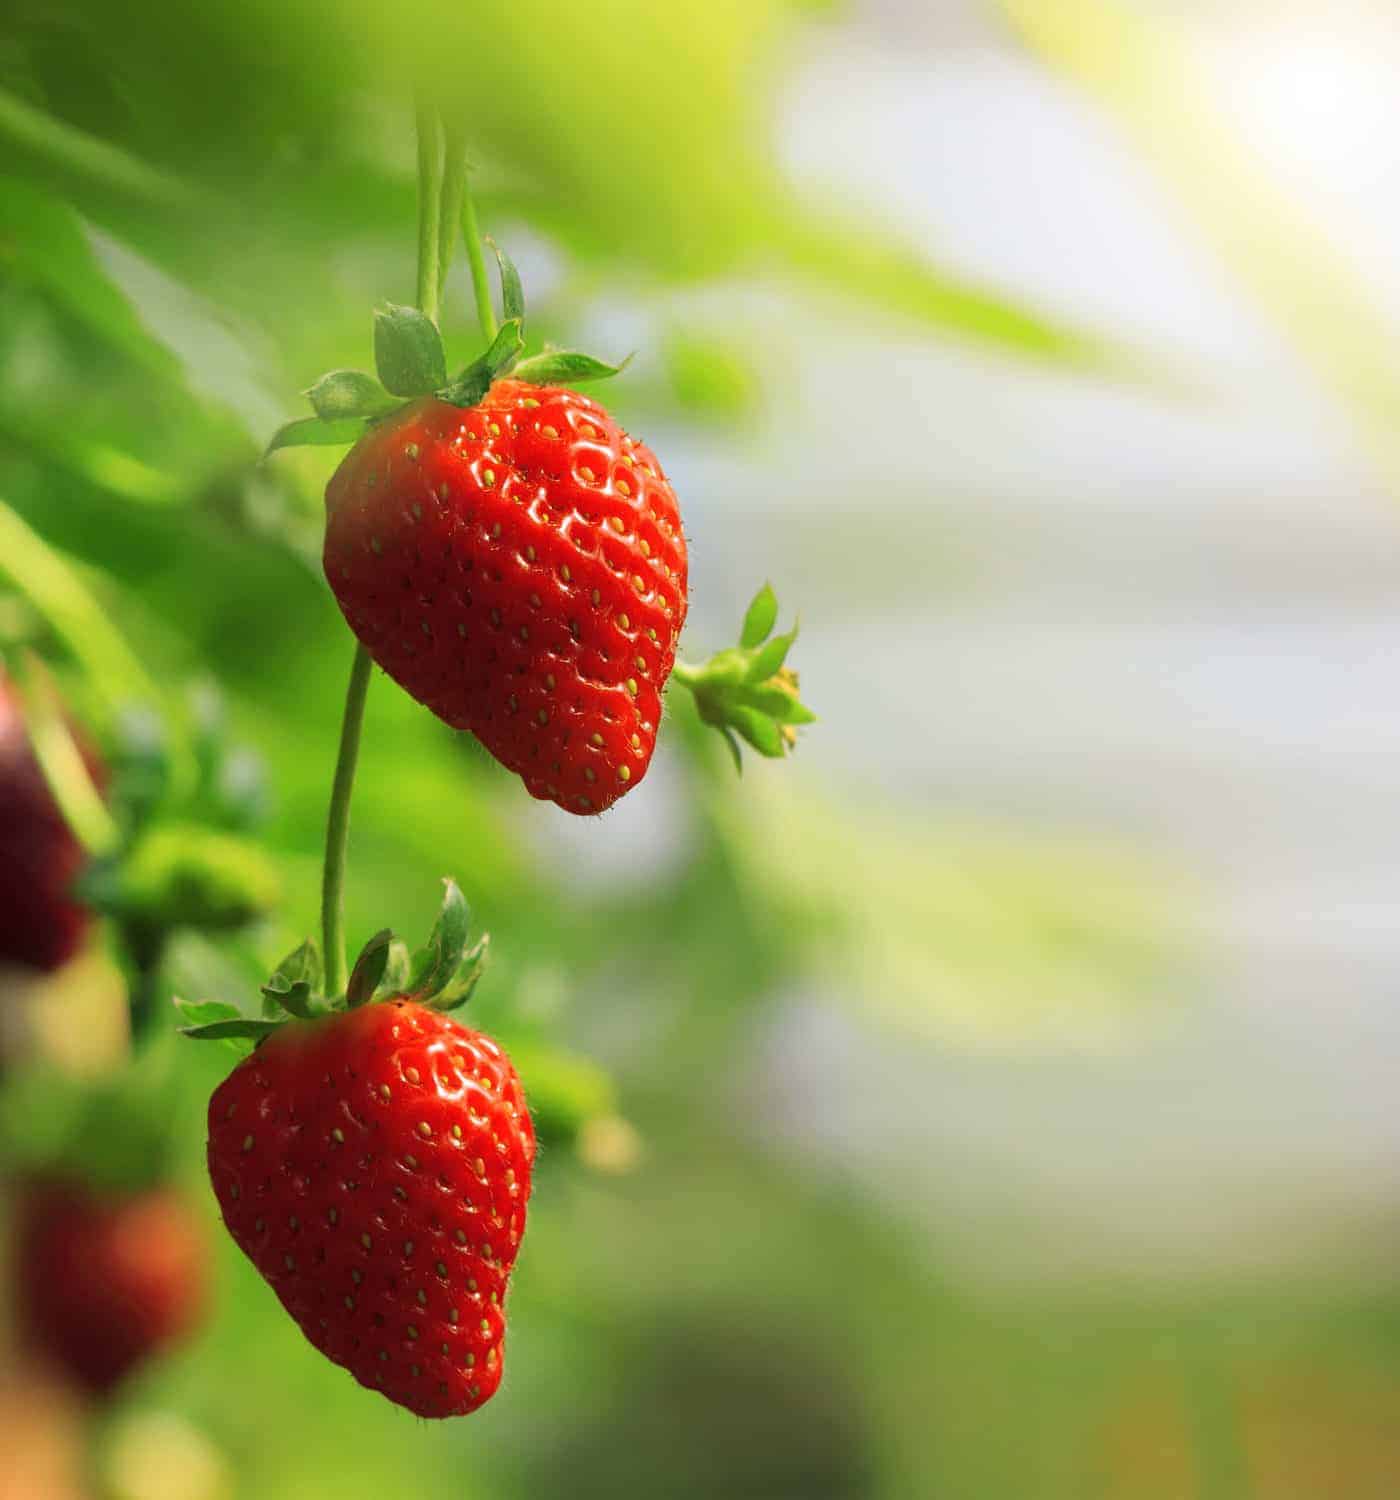 Eversweet strawberries growing on a strawberry plant